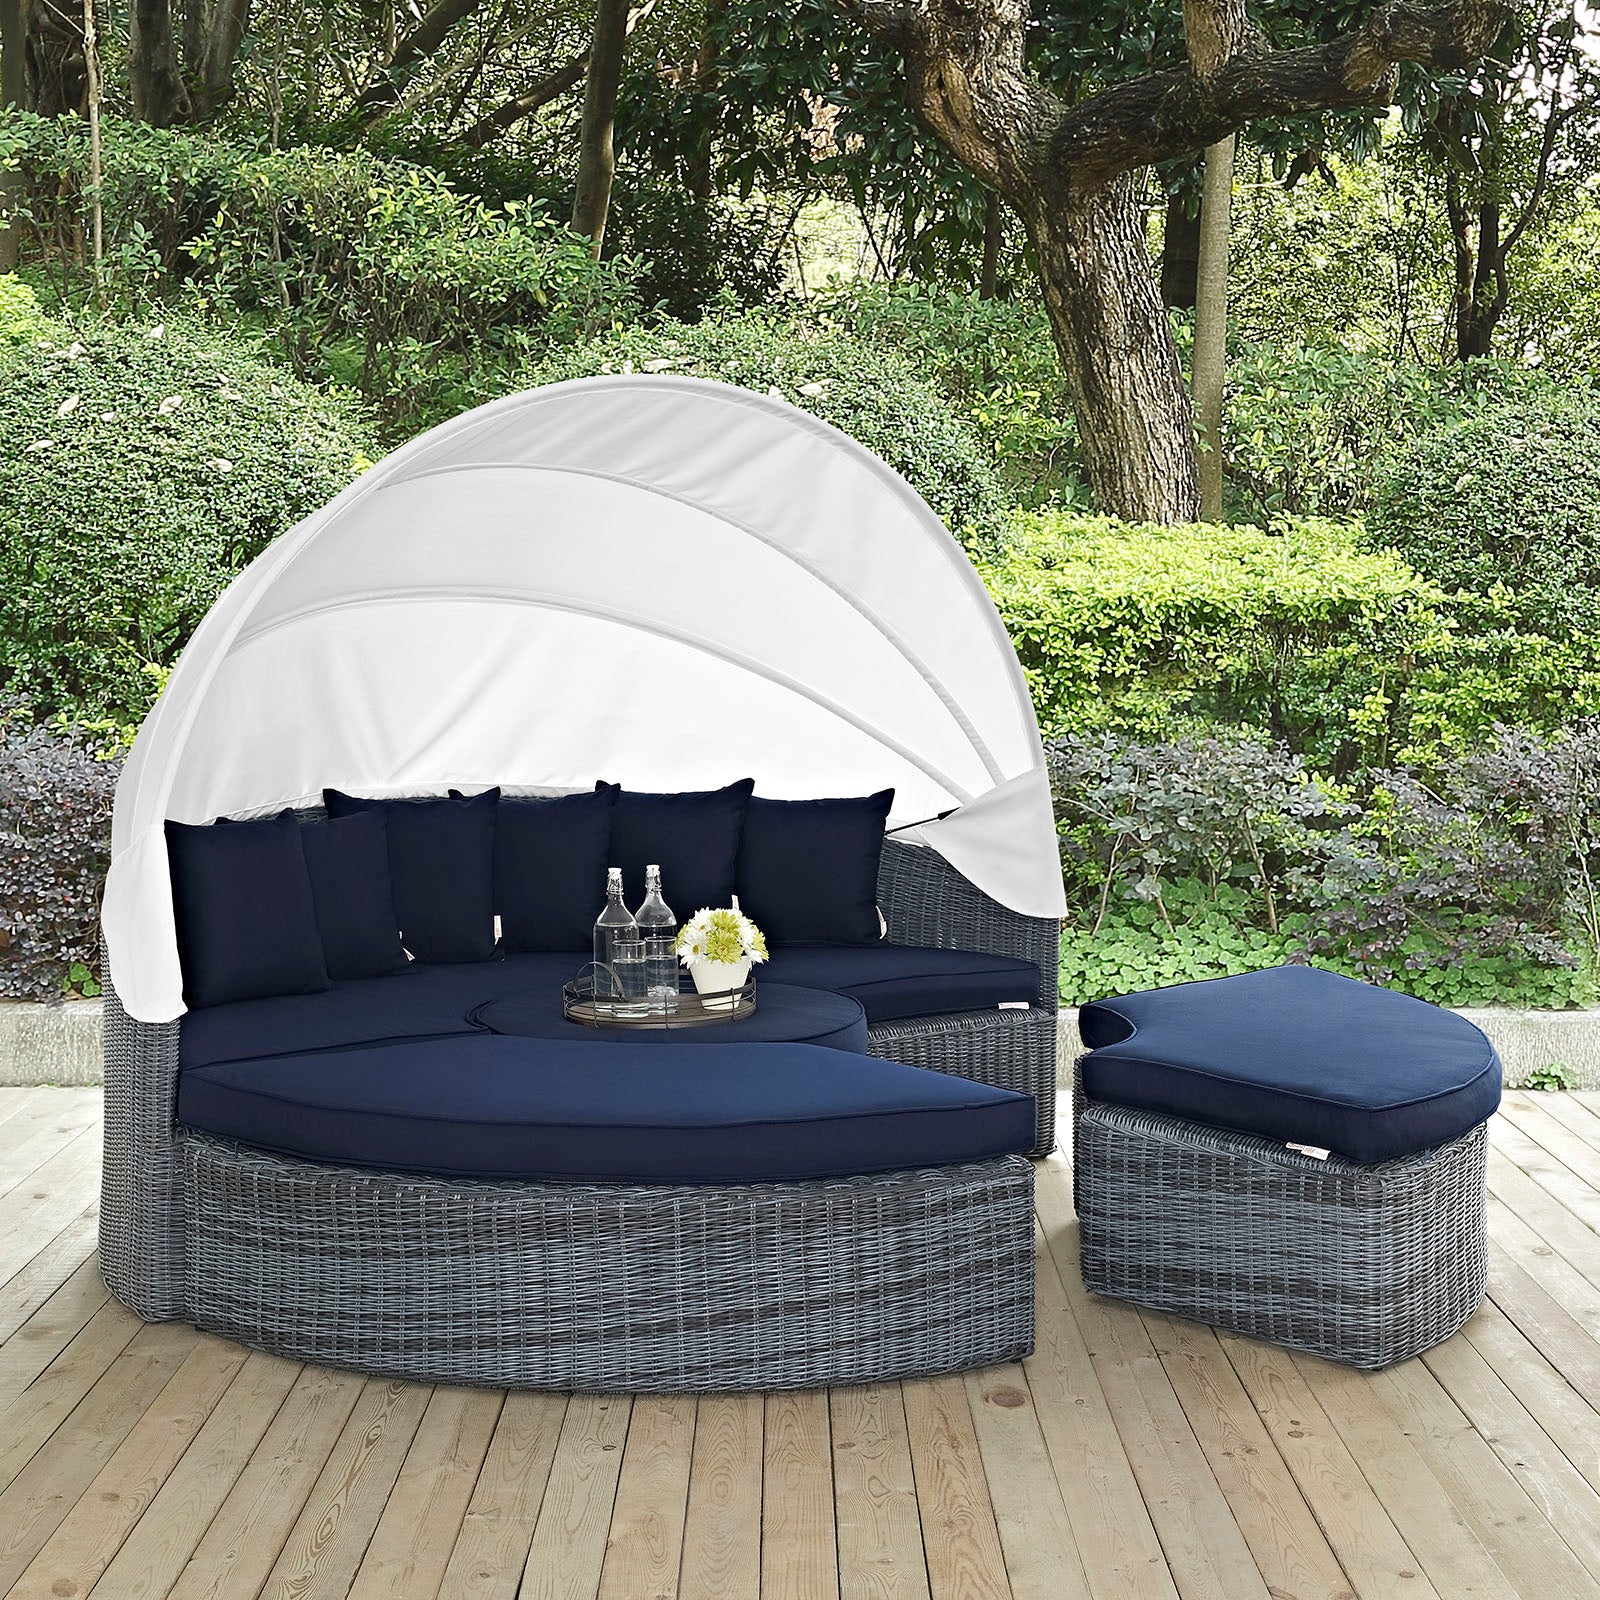 Modway Patio Daybeds - Summon Canopy Outdoor Patio Sunbrella Daybed Canvas Navy